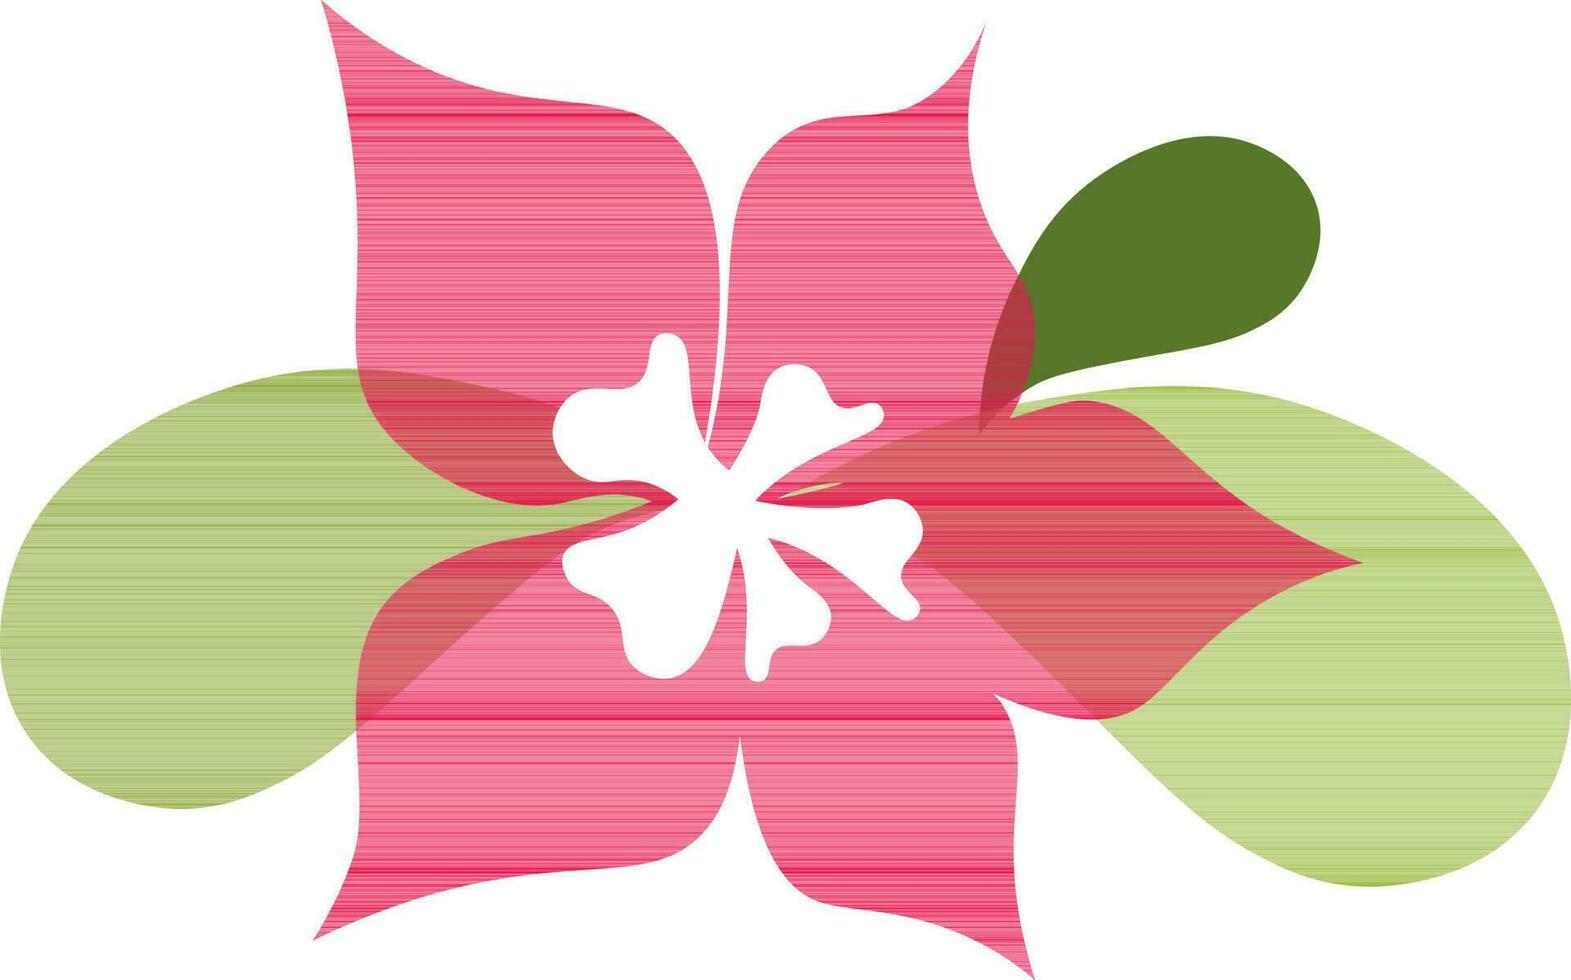 Pink and White Flower with Green Leaves icon. vector